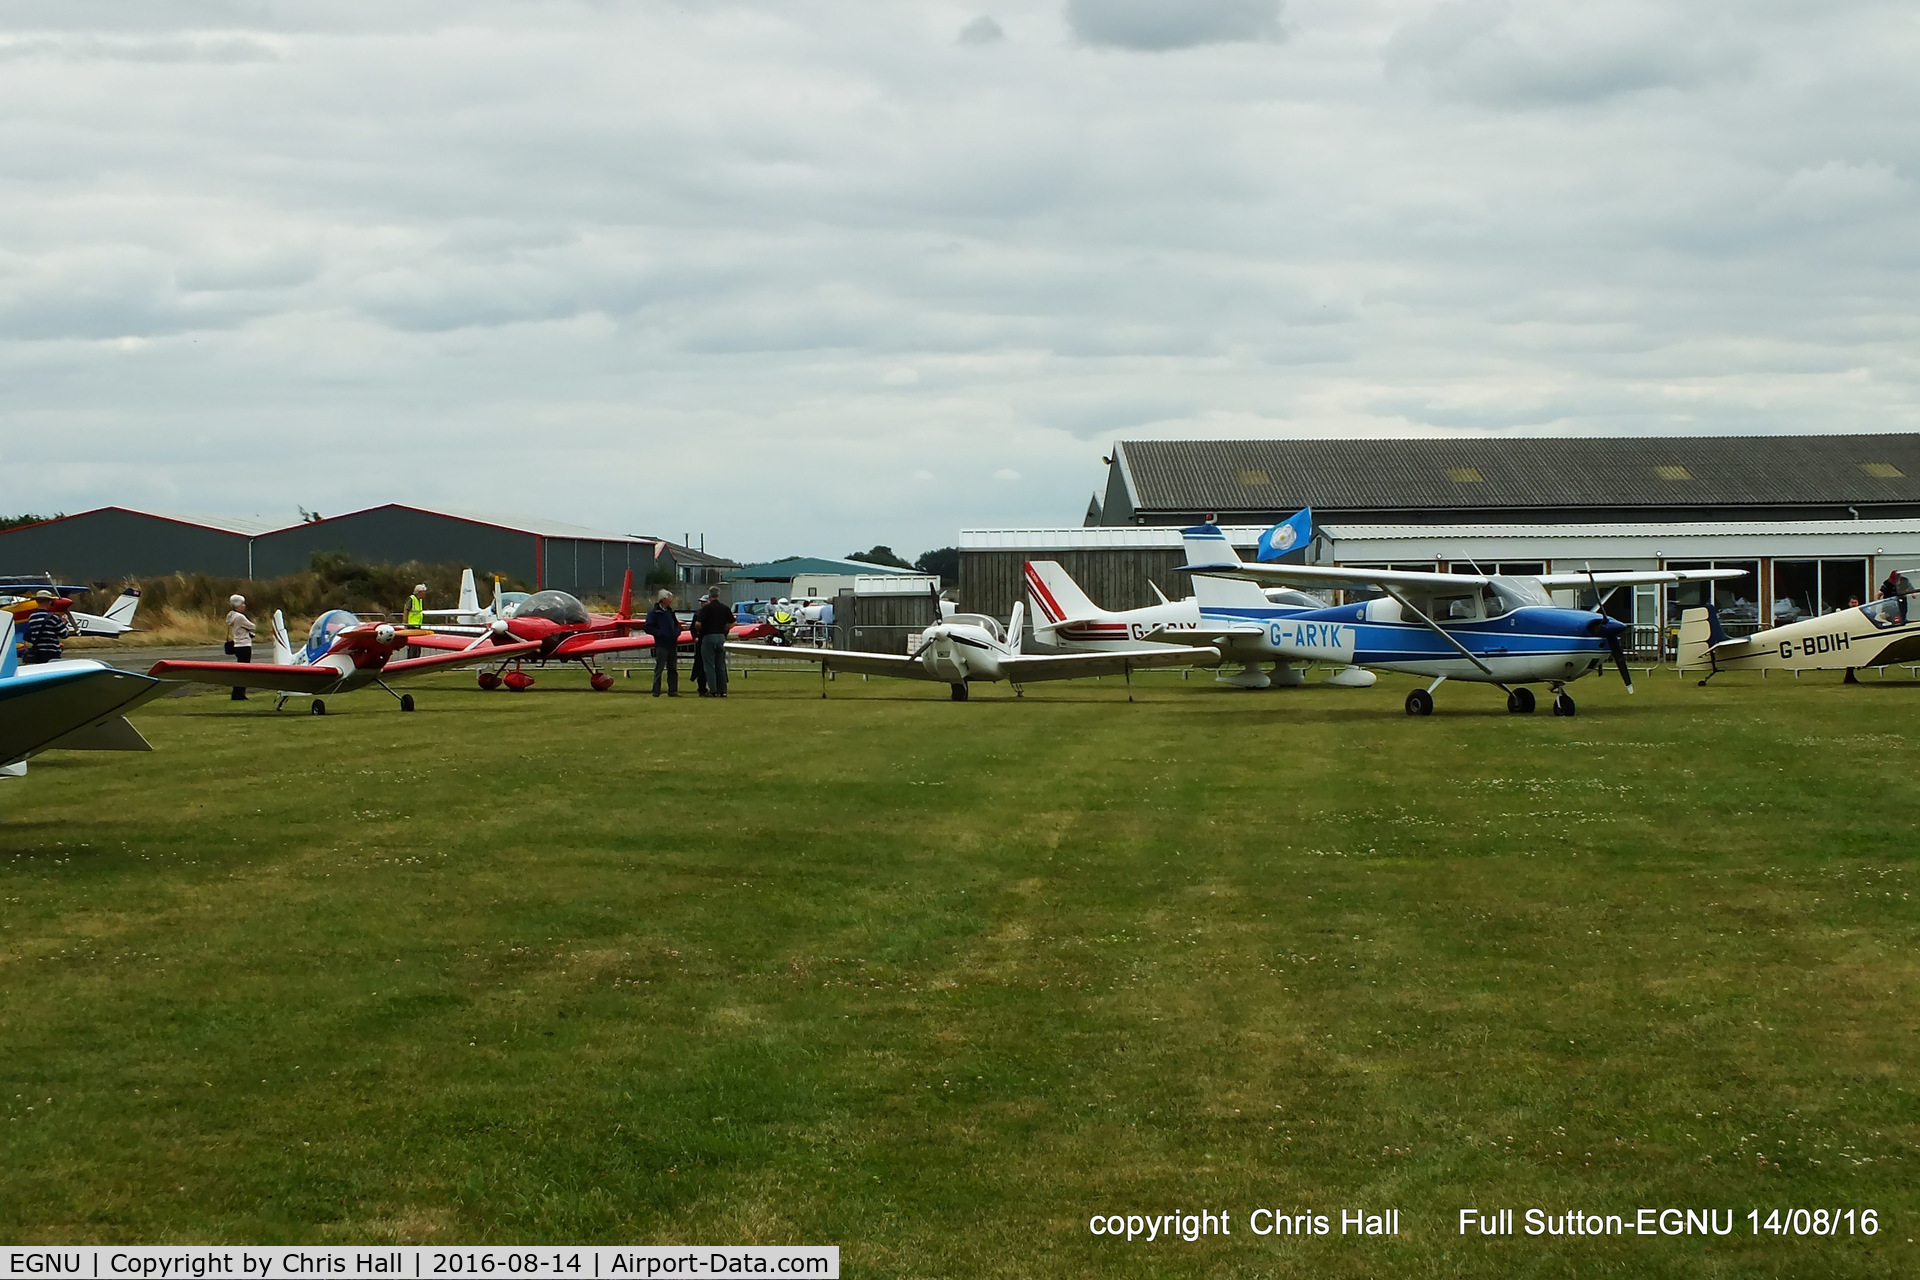 Full Sutton Airfield Airport, York, England United Kingdom (EGNU) - LAA Vale of York Strut fly-in, Full Sutton